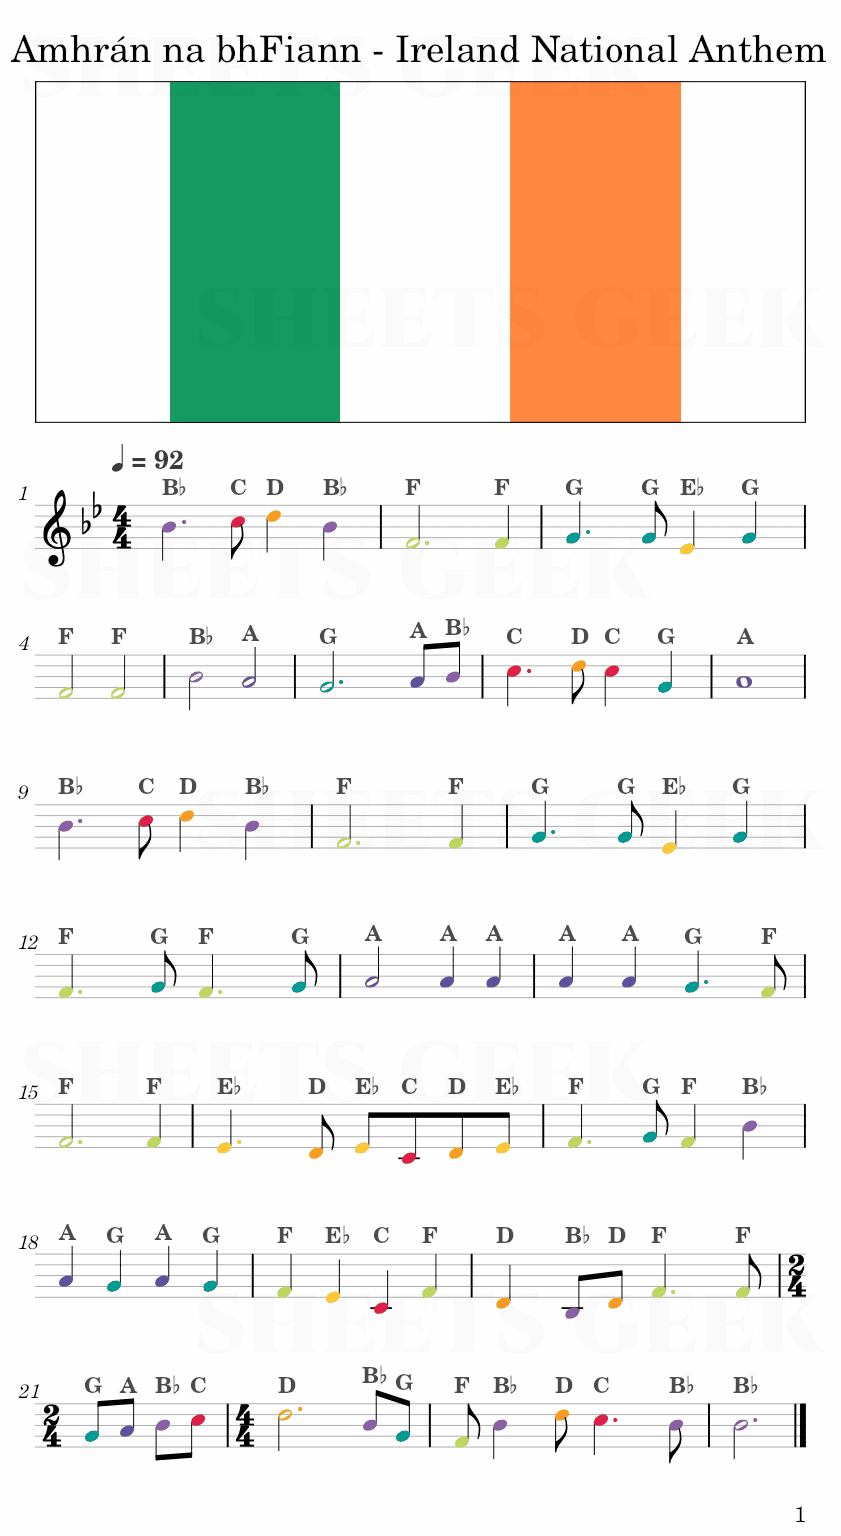 Amhrán na bhFiann - Ireland National Anthem Easy Sheet Music Free for piano, keyboard, flute, violin, sax, cello page 1